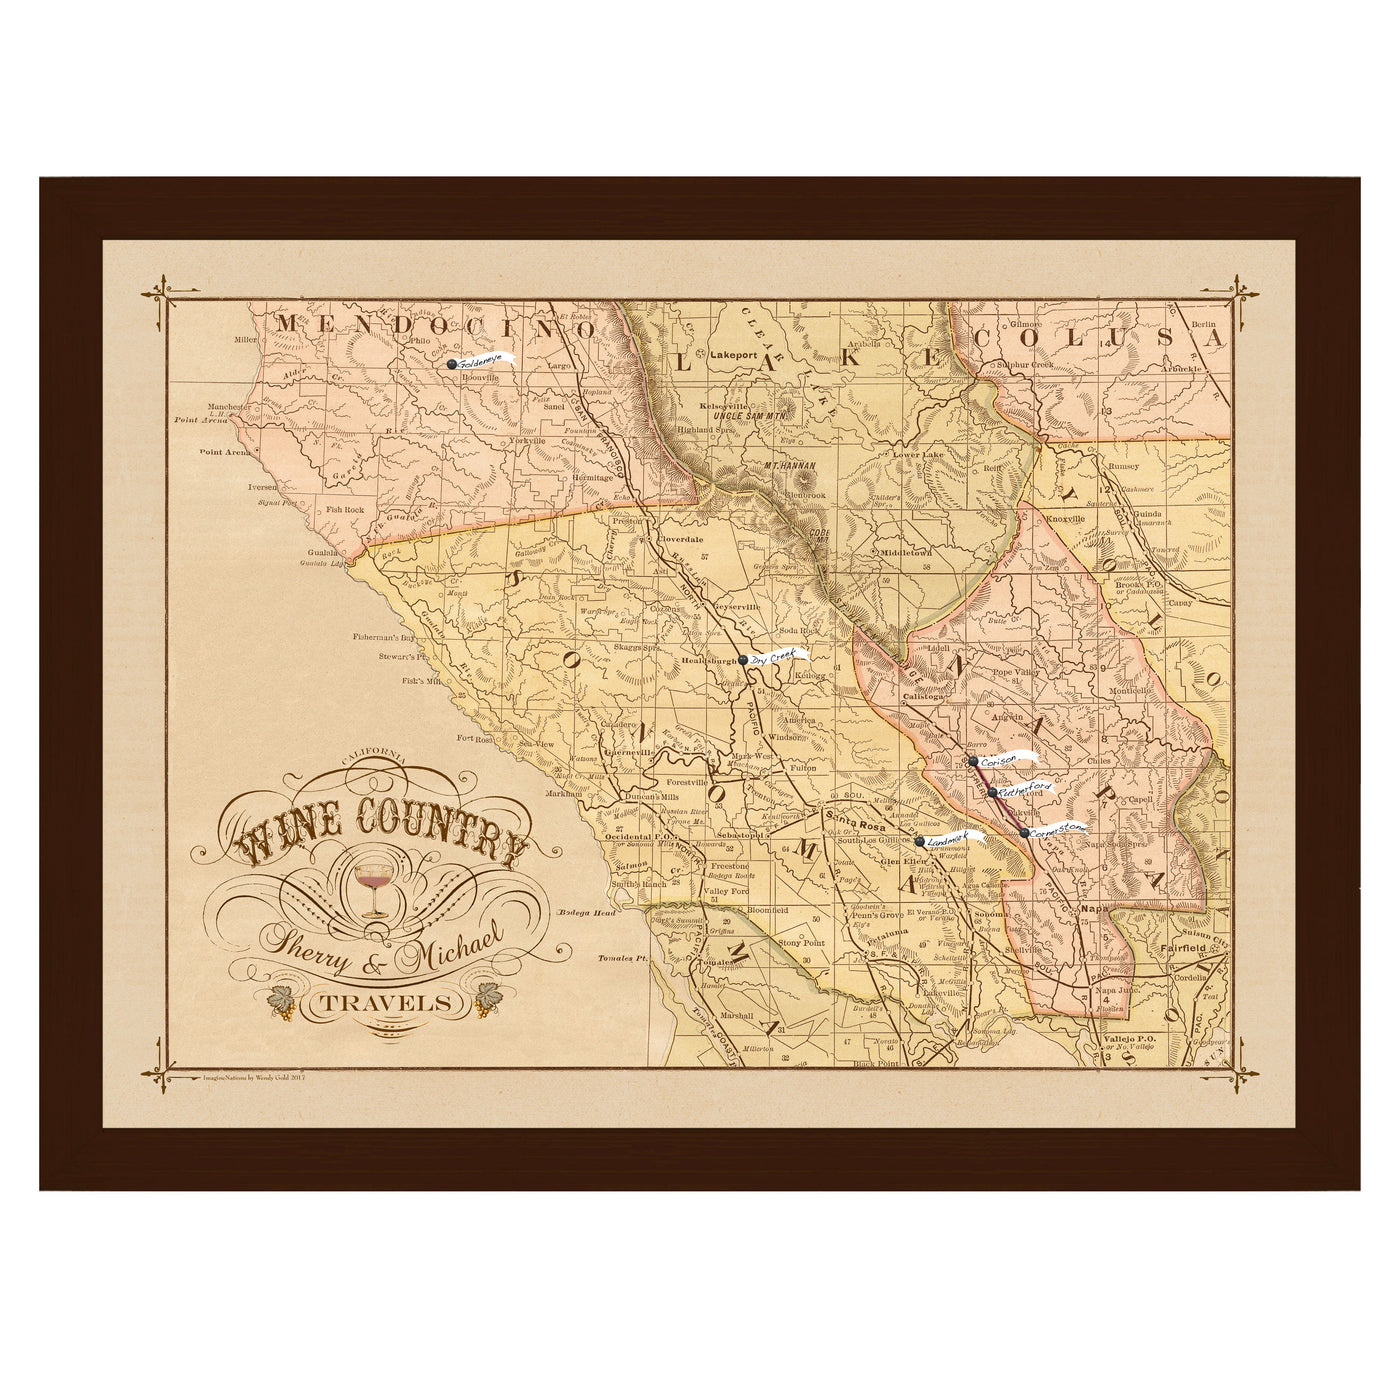 Wine Country Napa Sonoma Winery Tasting Pin Map framed